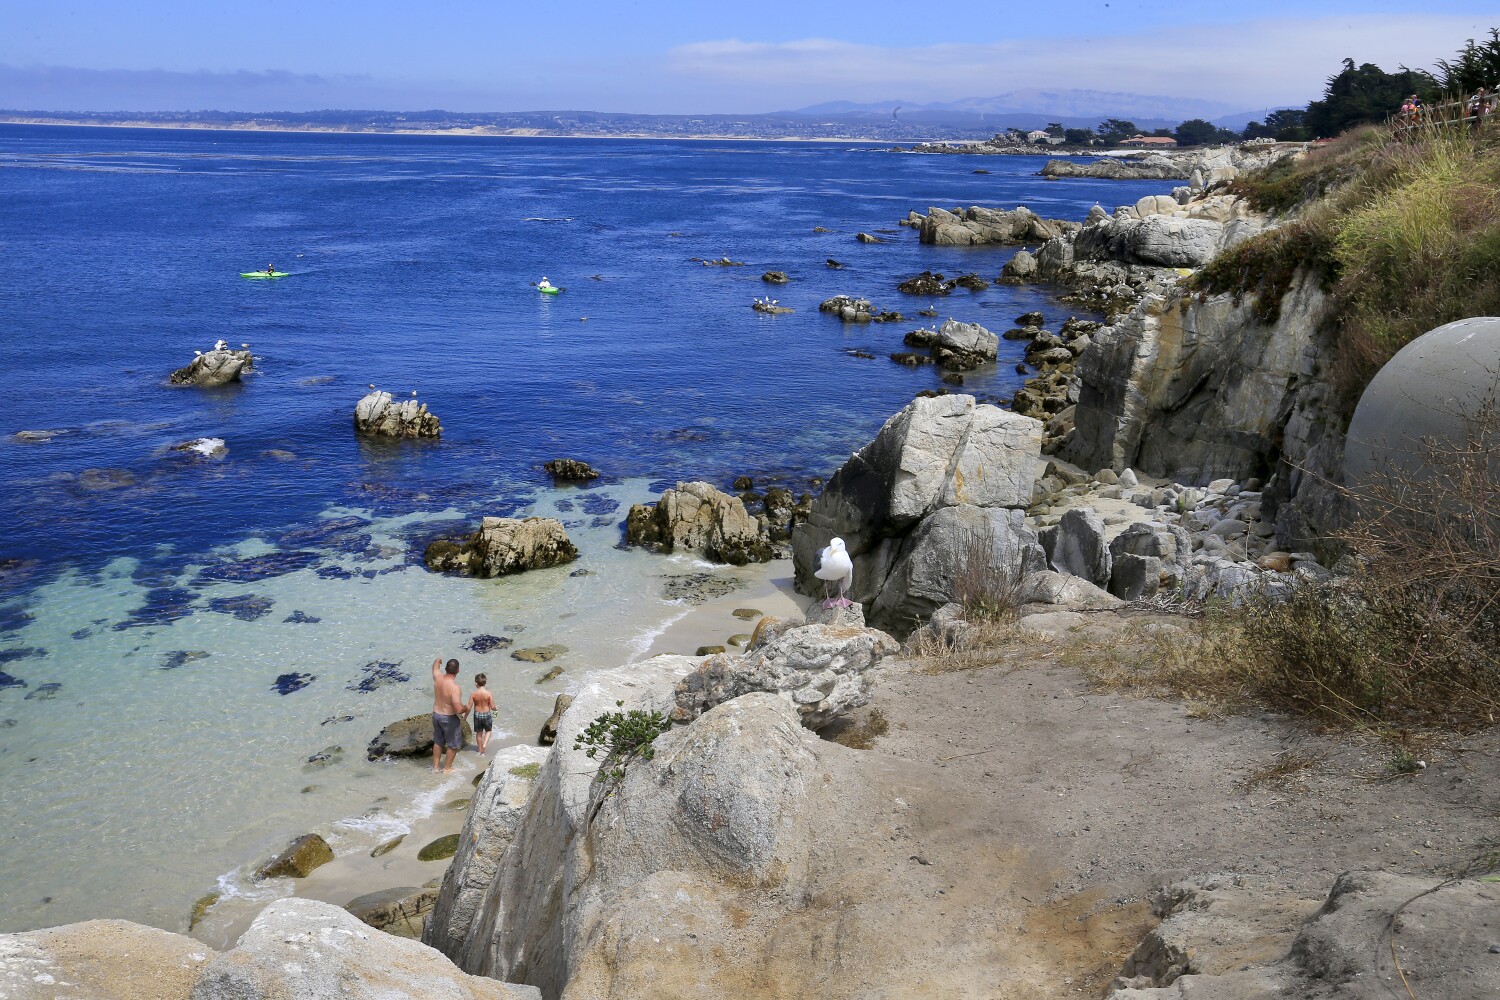 Shark attack in Pacific Grove seriously injures surfer